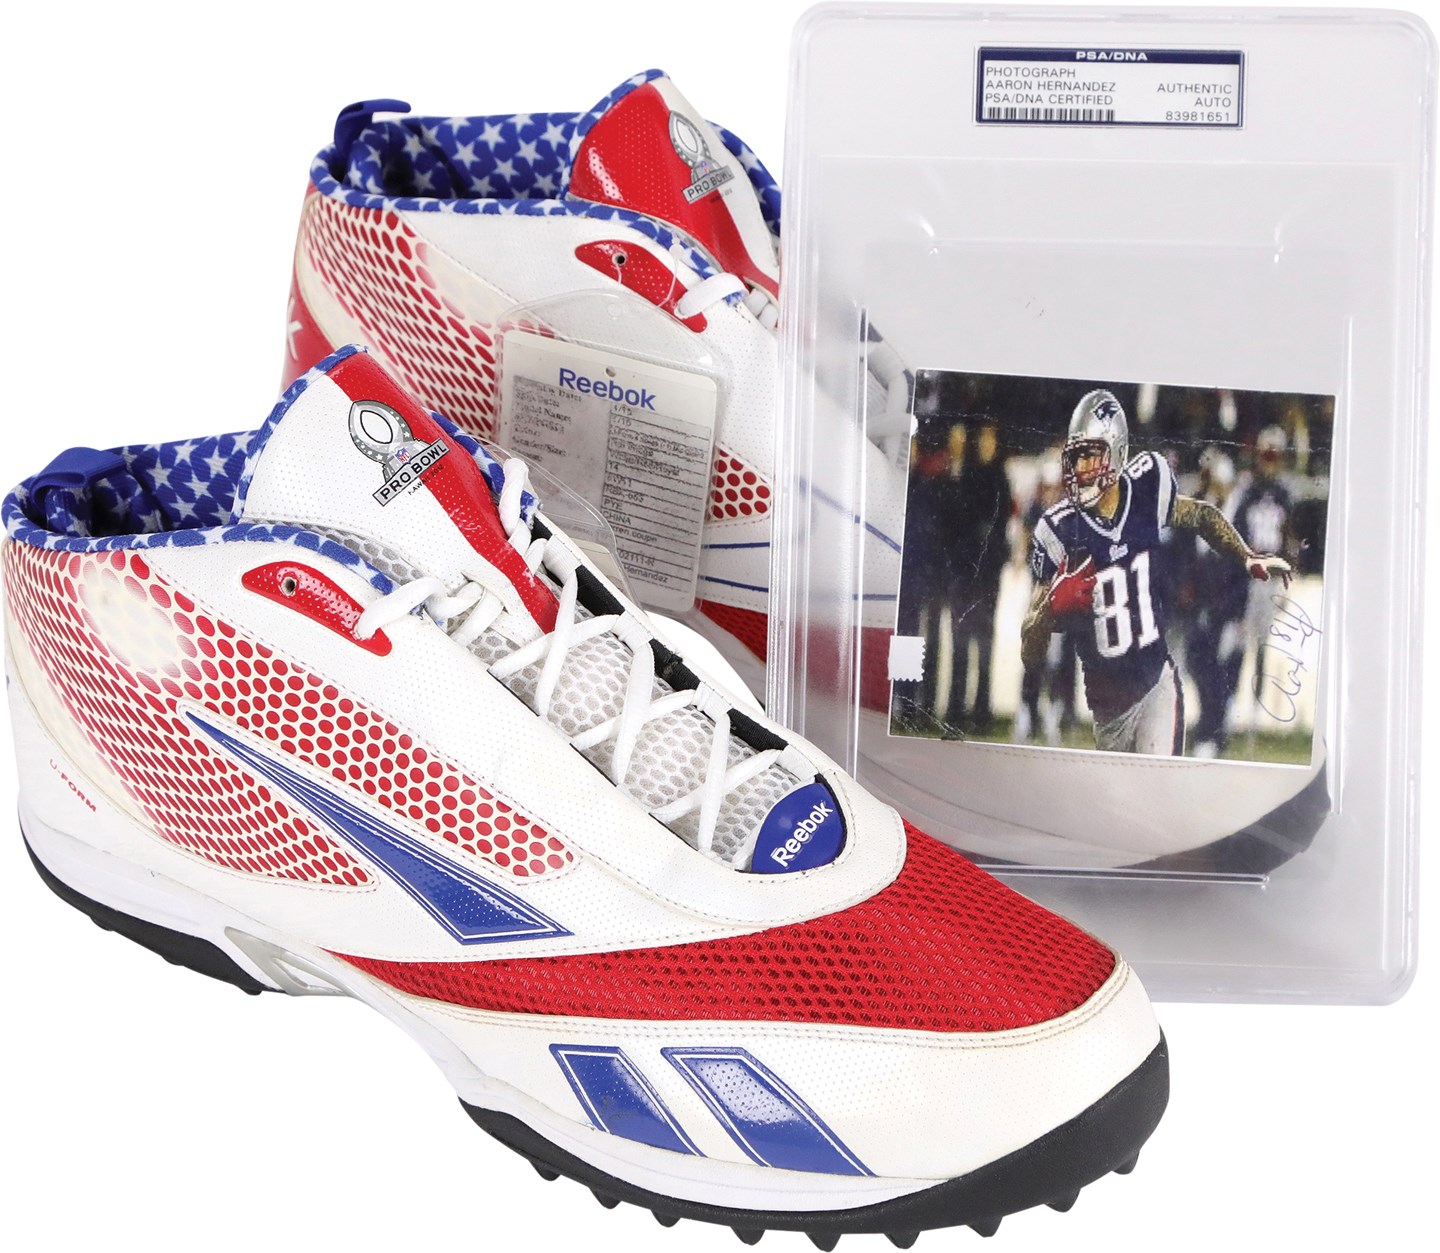 - Aaron Hernandez Pro Bowl Game Issued Cleats with Signed Photo (PSA)